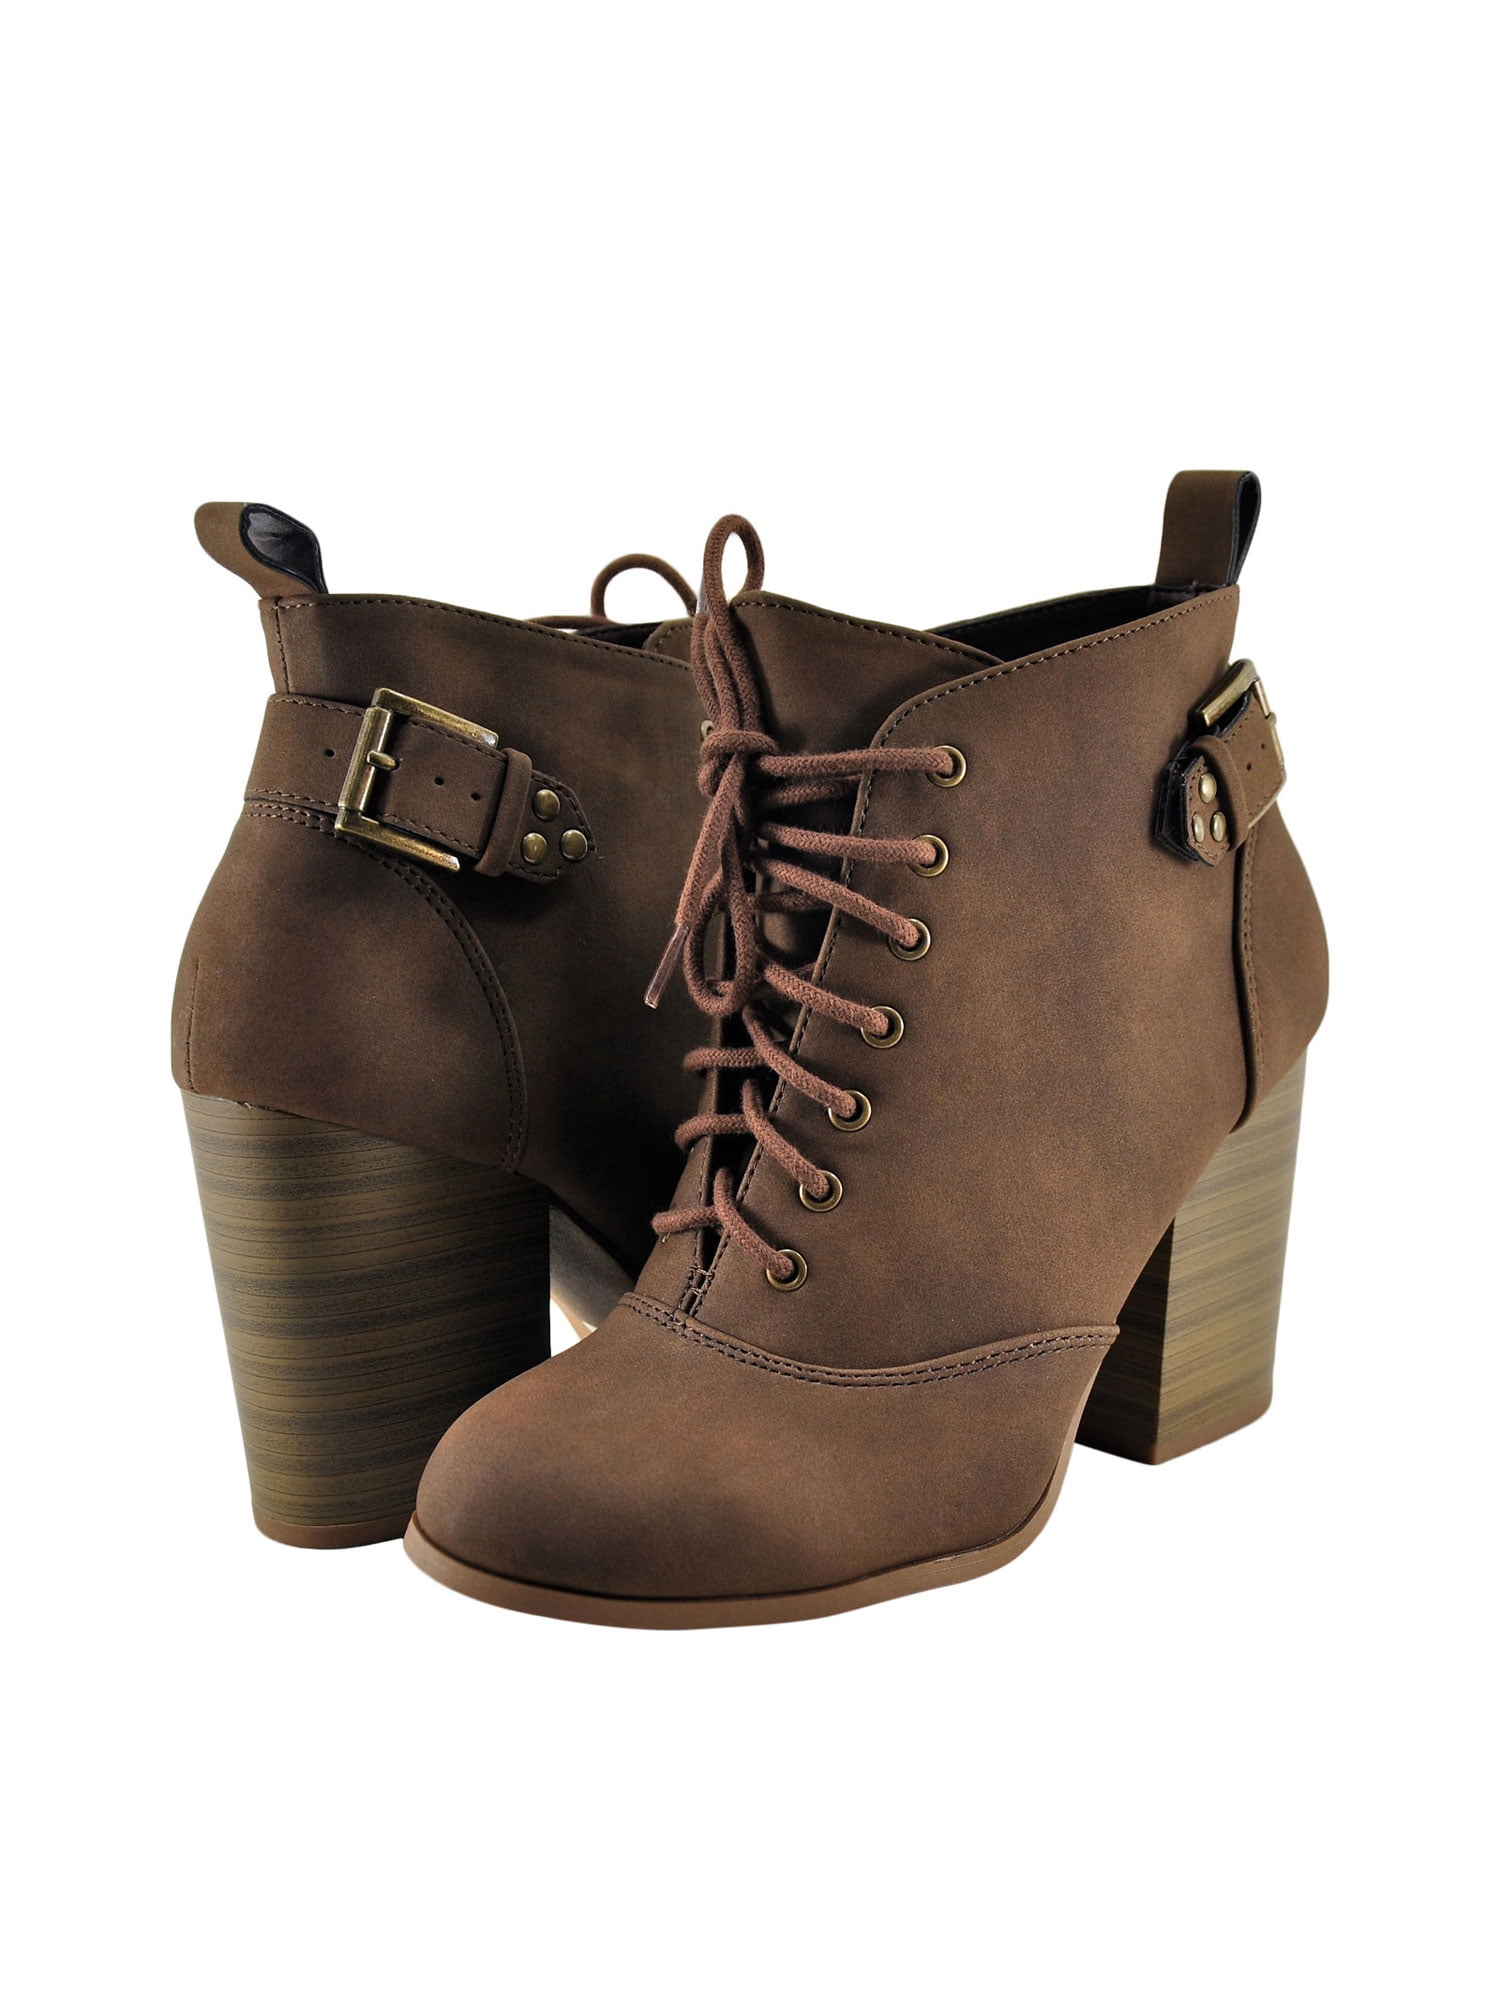 Details about   New Women Comfort Flats Round Toe Zipper Outdoor Chelsea High Top Ankle Boots D